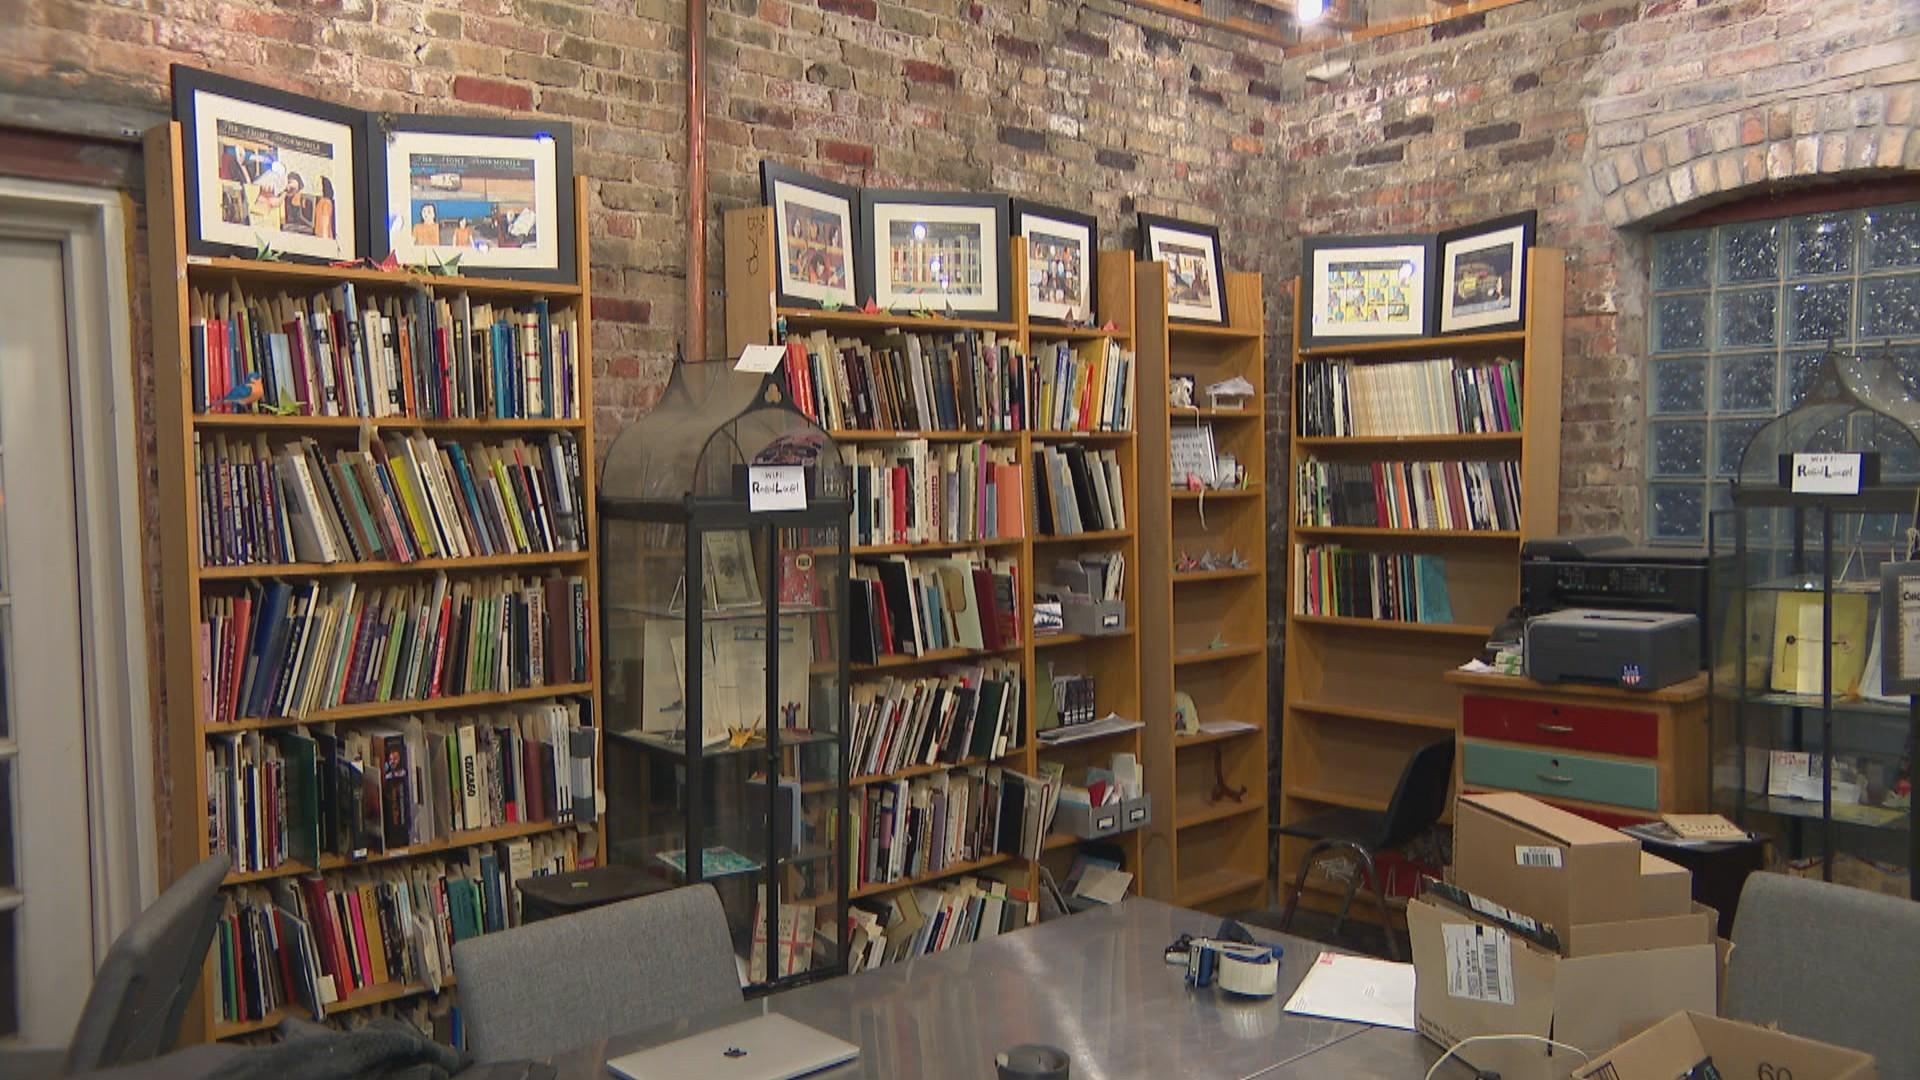 The Read/Write Library is filled with unique publications like creative books, neighborhood newspapers and personal narratives by people who are incarcerated. (WTTW News)